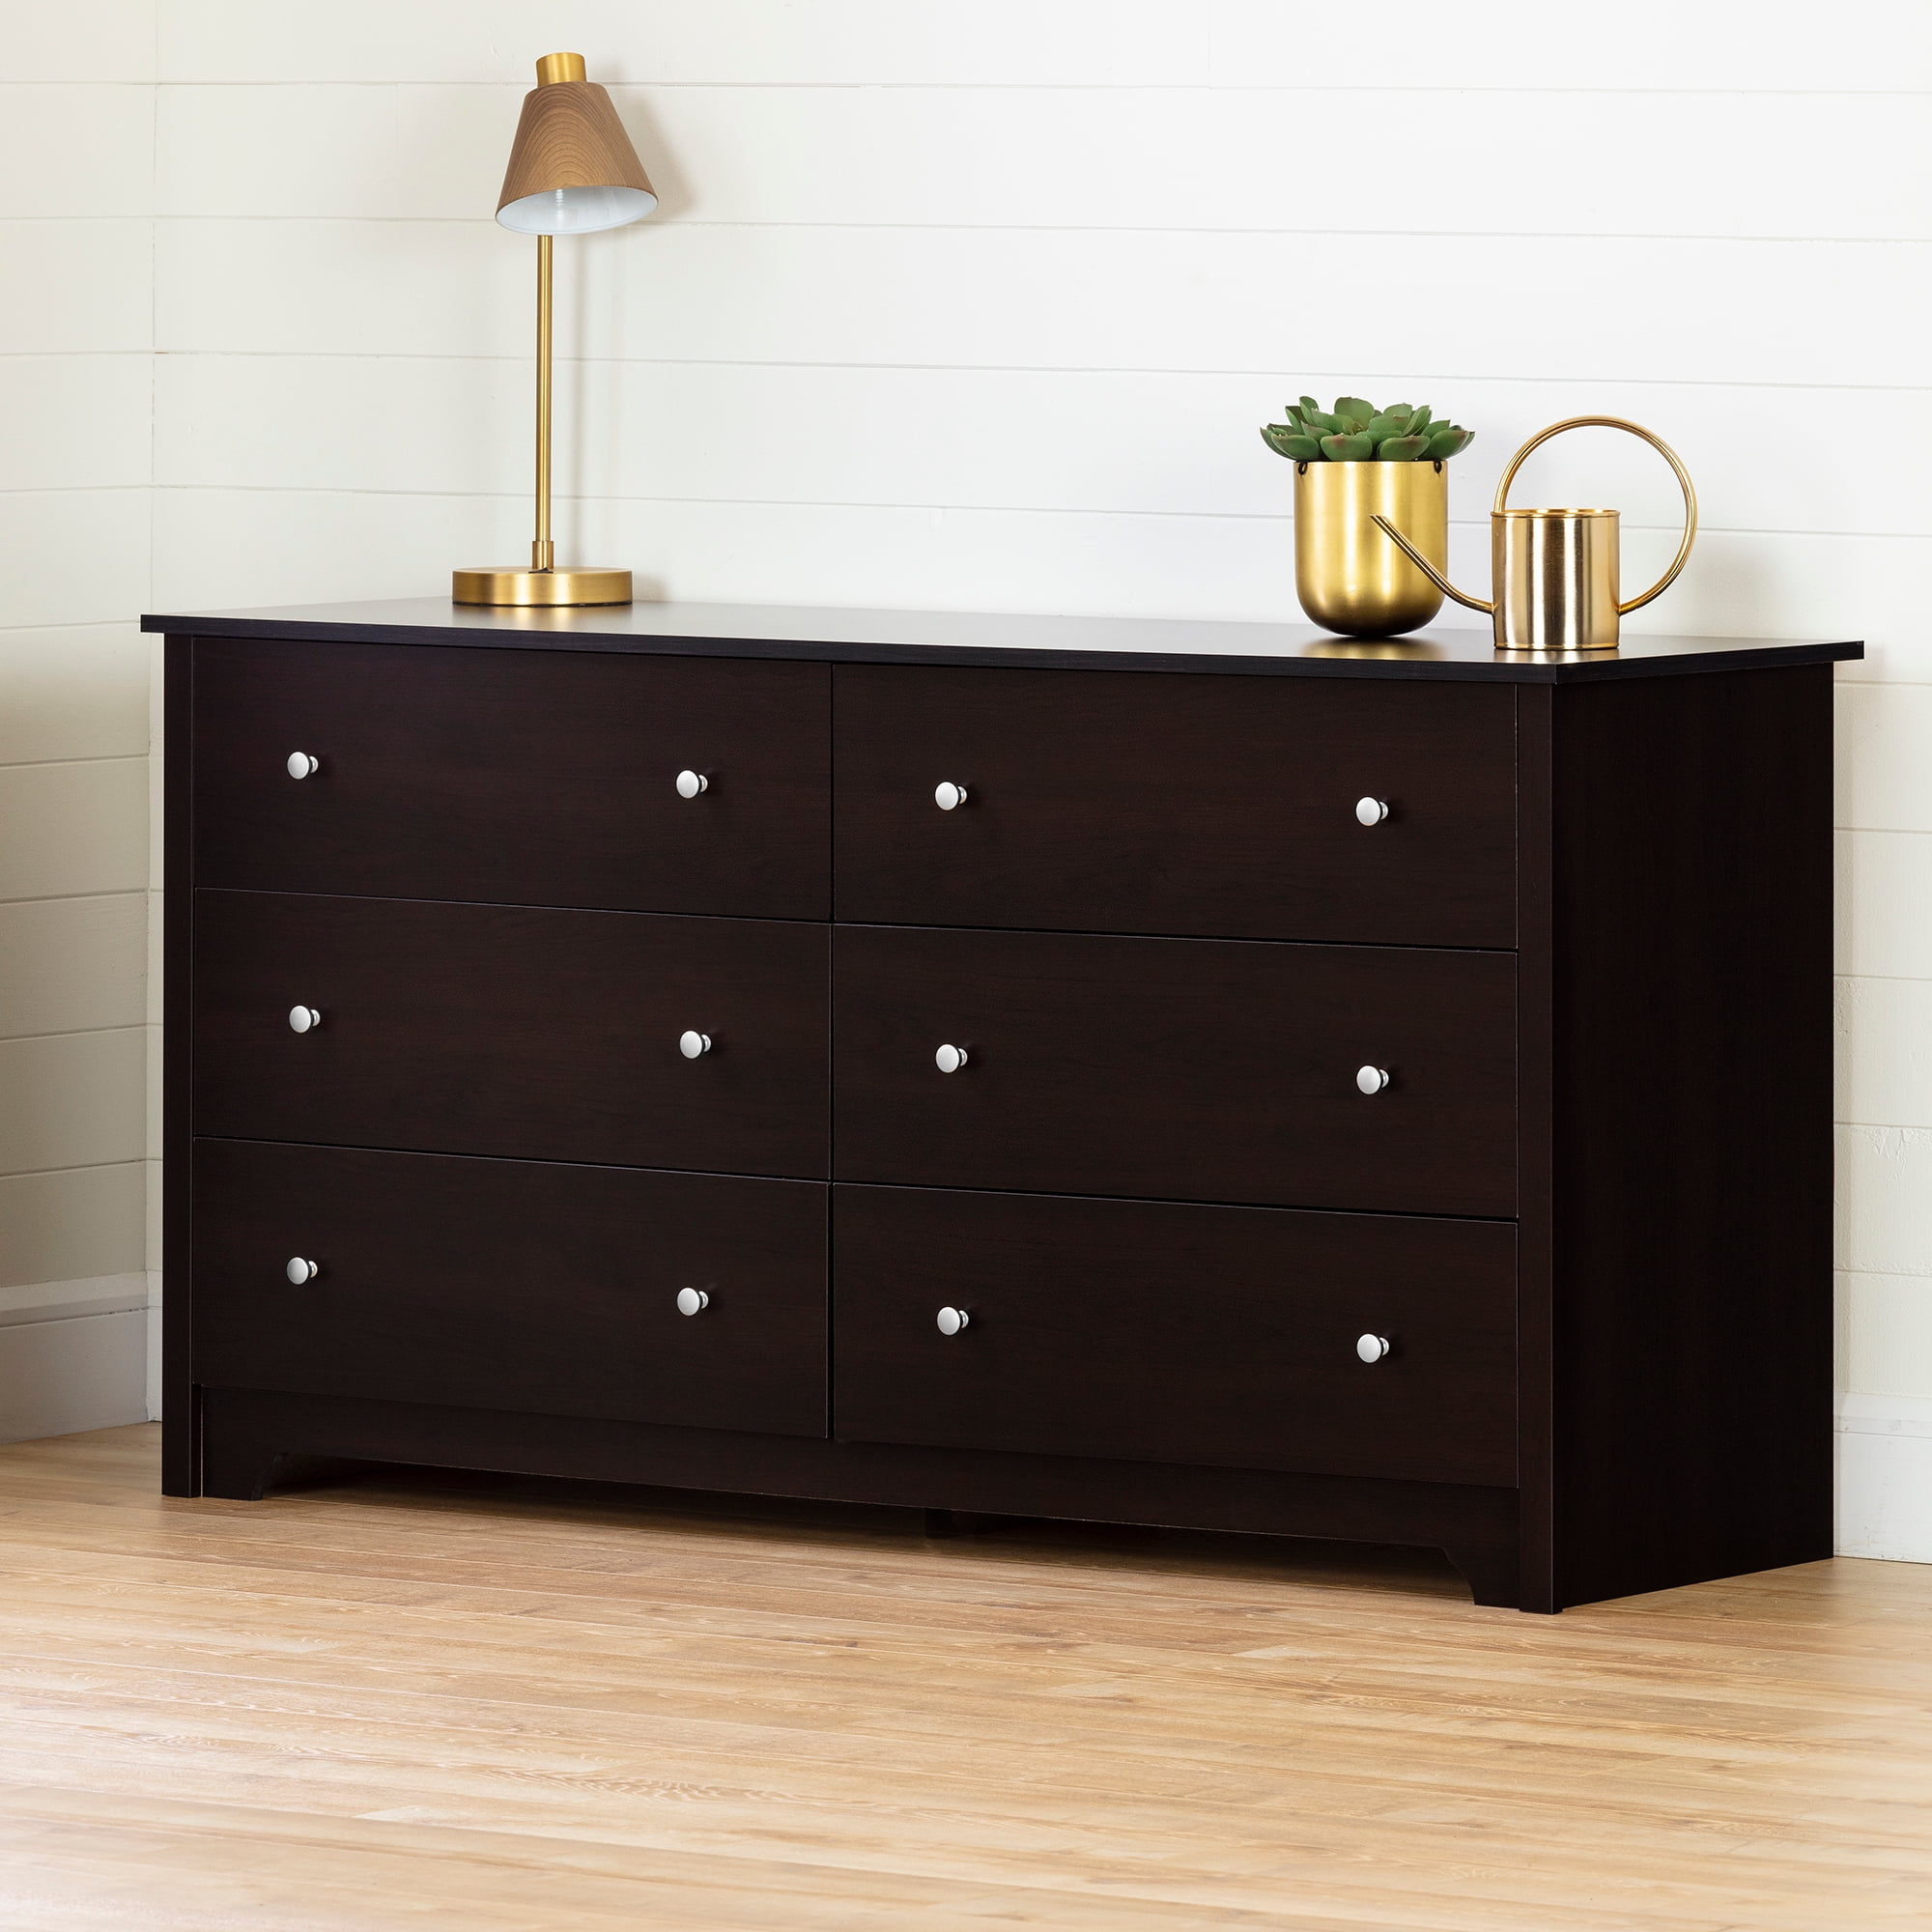 South Shore Vito 6 Drawer Double Dresser Multiple Finishes